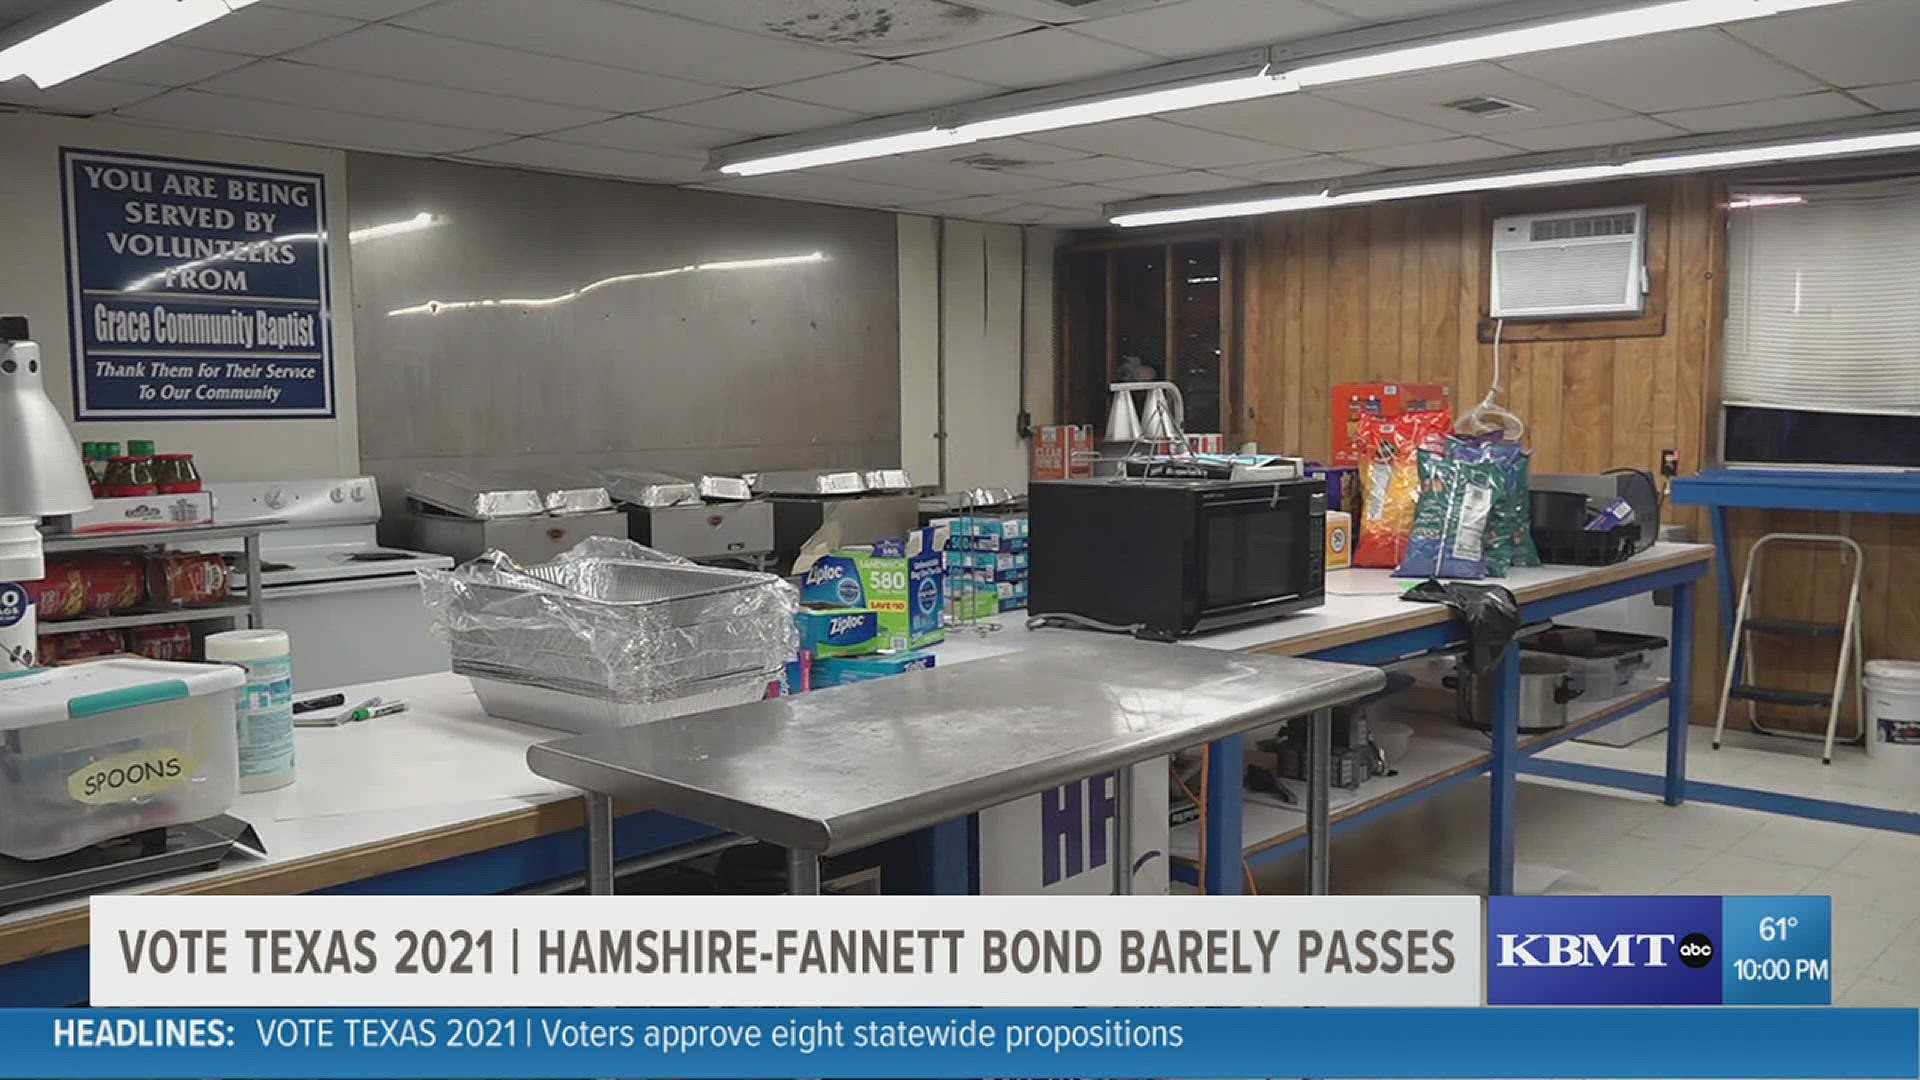 Hamshire-Fannett Independent School District voters, with a five vote margin of less than 1%, decided to fund a $1.48M bond for a new concession stand.